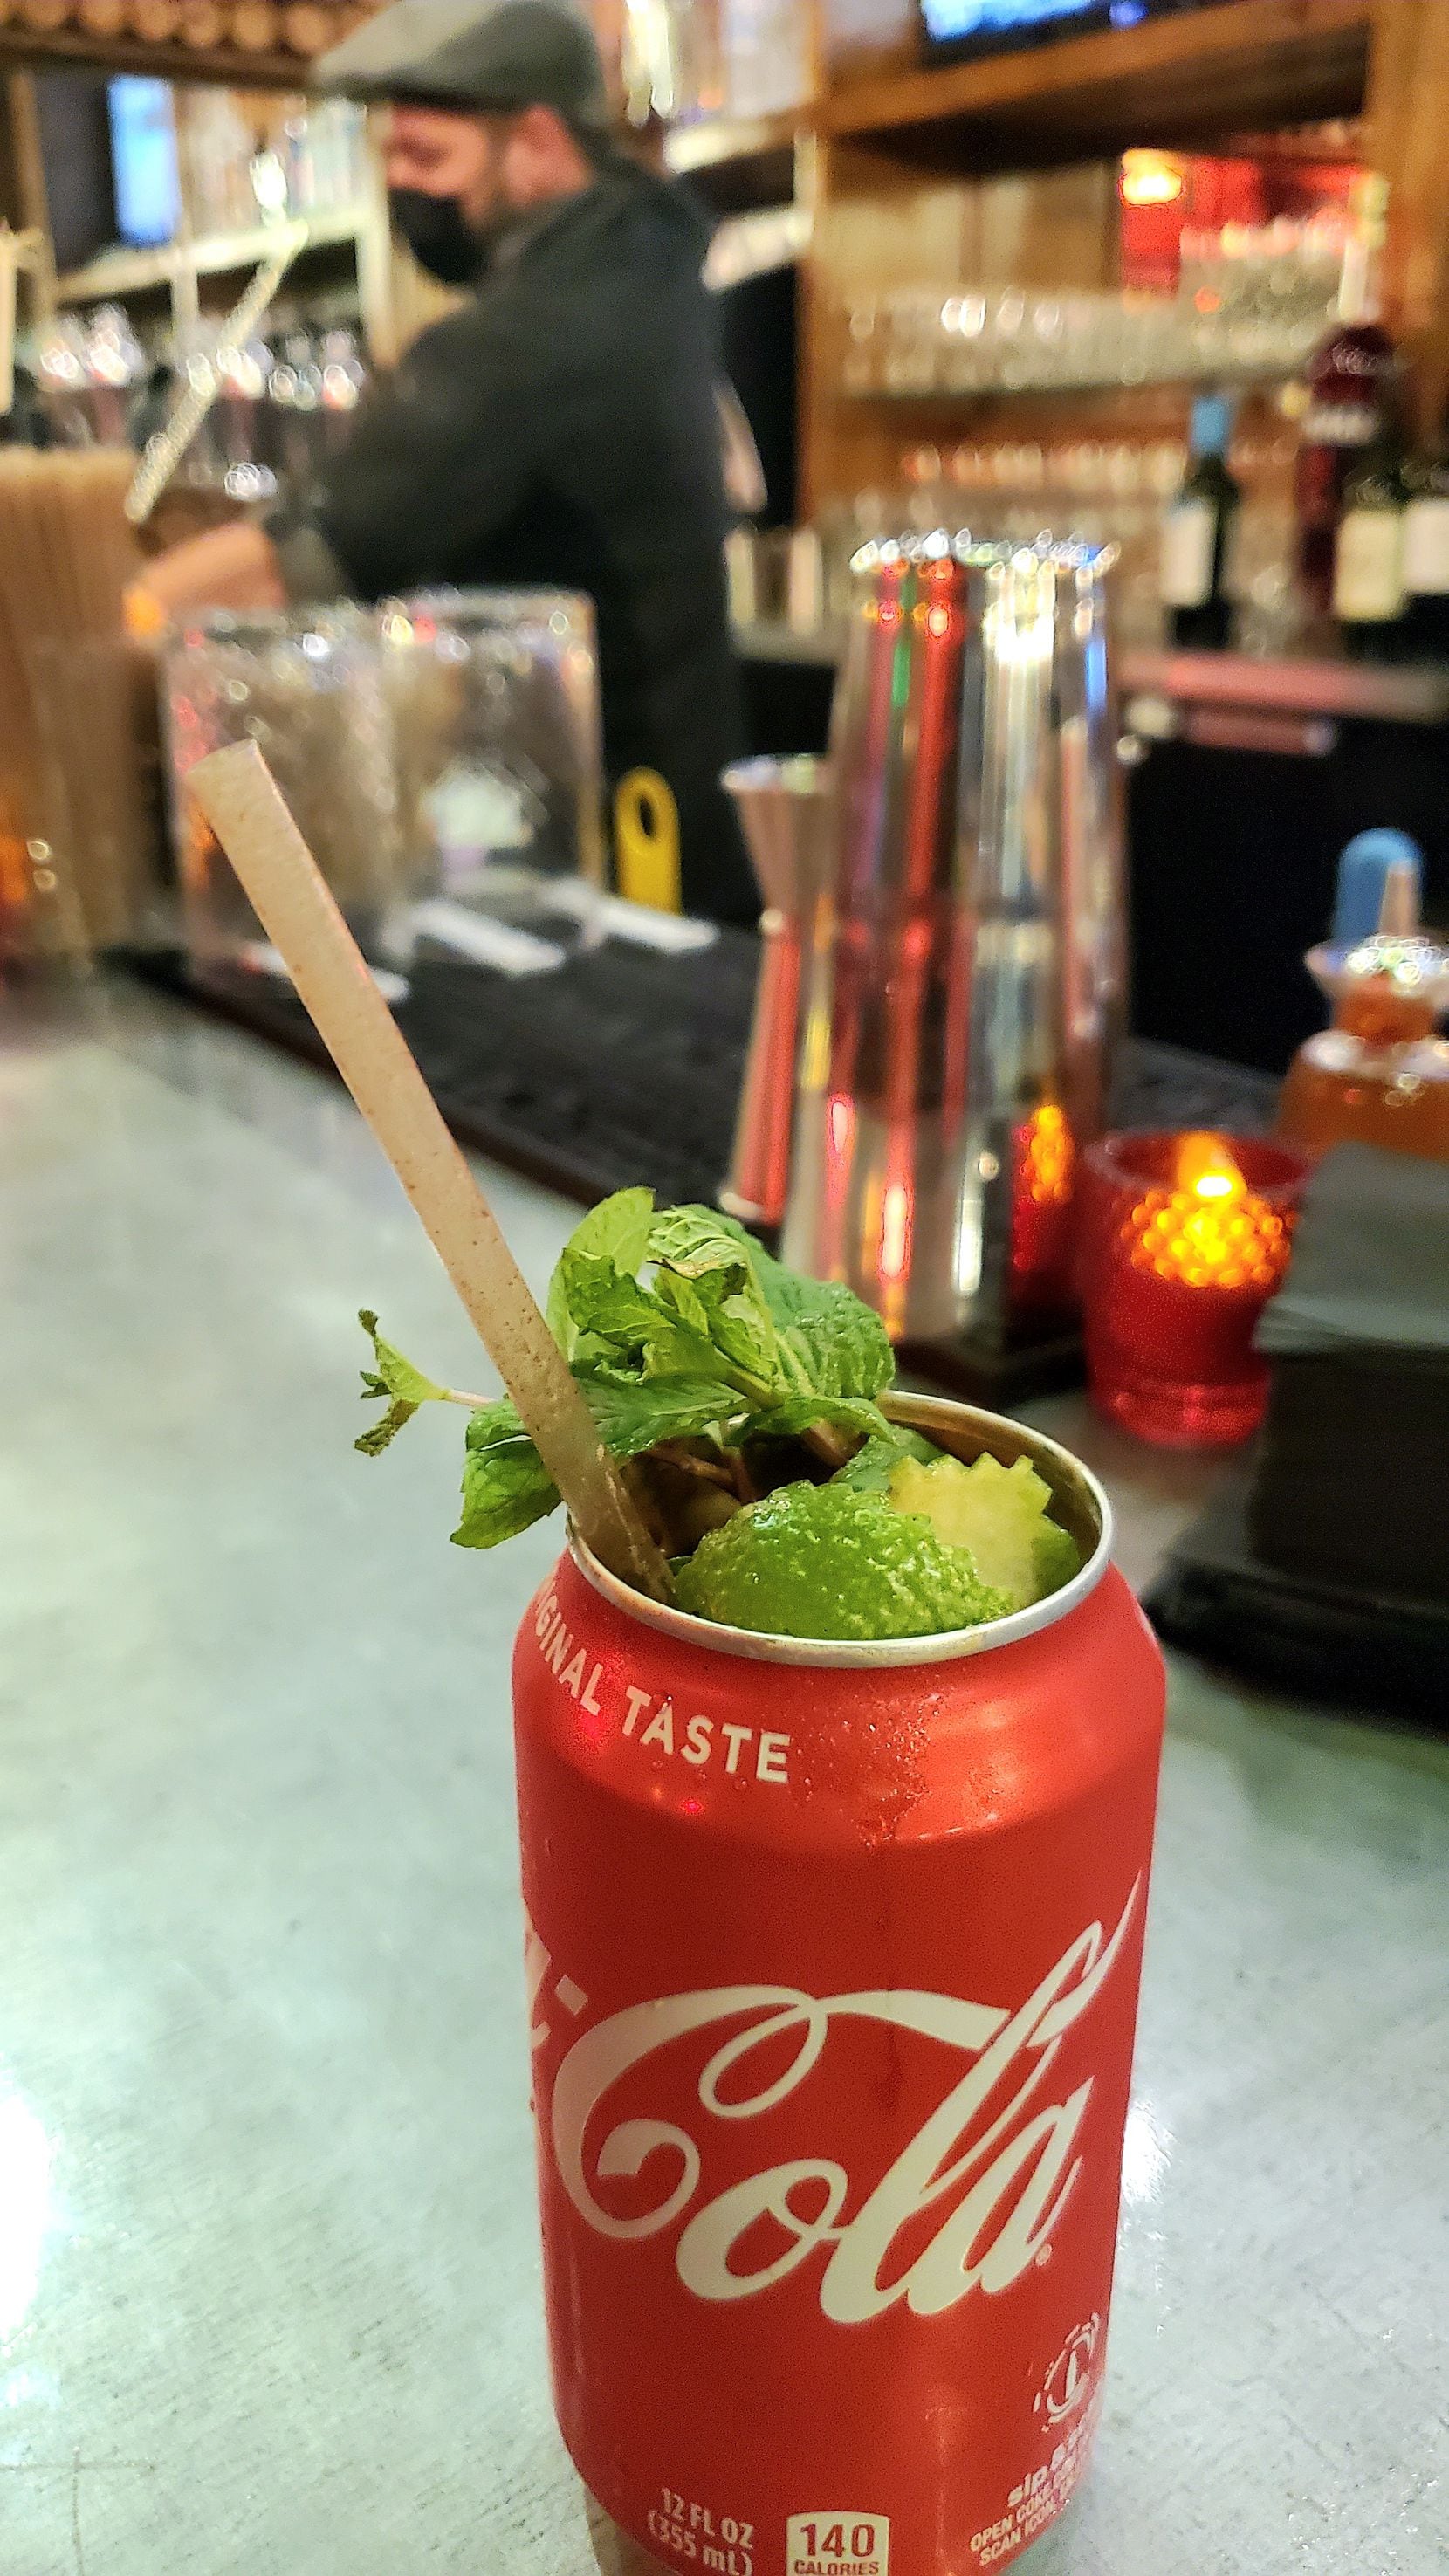 At Chimichurri, Argentina's so-called national drink, the Fernet and Coke, is served in a...